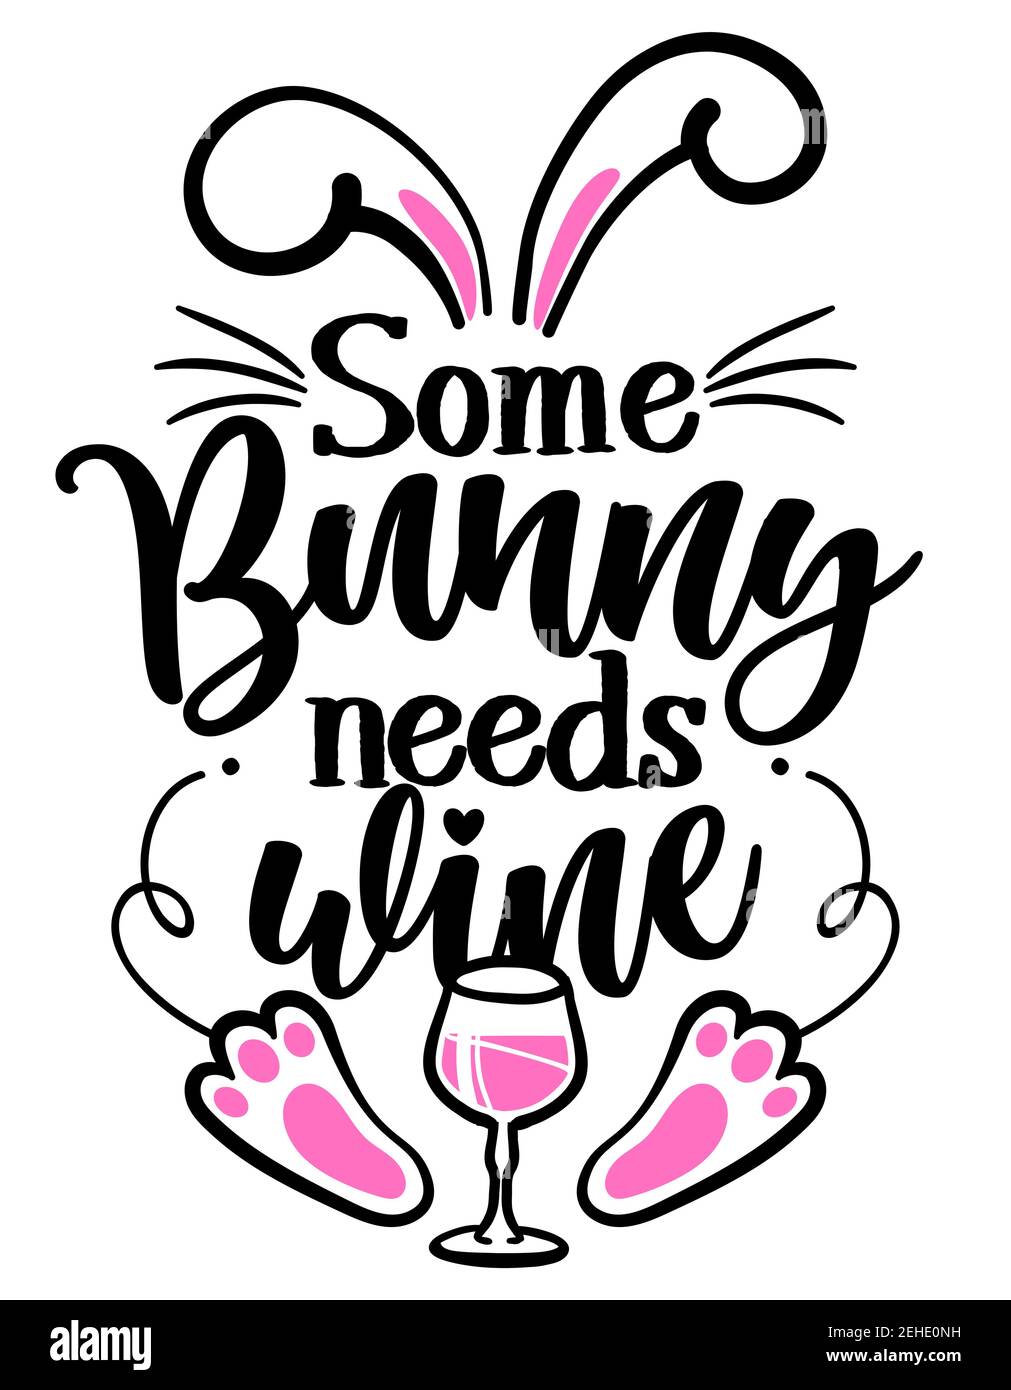 Some Bunny needs Wine (Somebody needs wine) - SASSY Calligraphy phrase for Easter day. Hand drawn lettering for Easter greetings cards, invitations. G Stock Vector